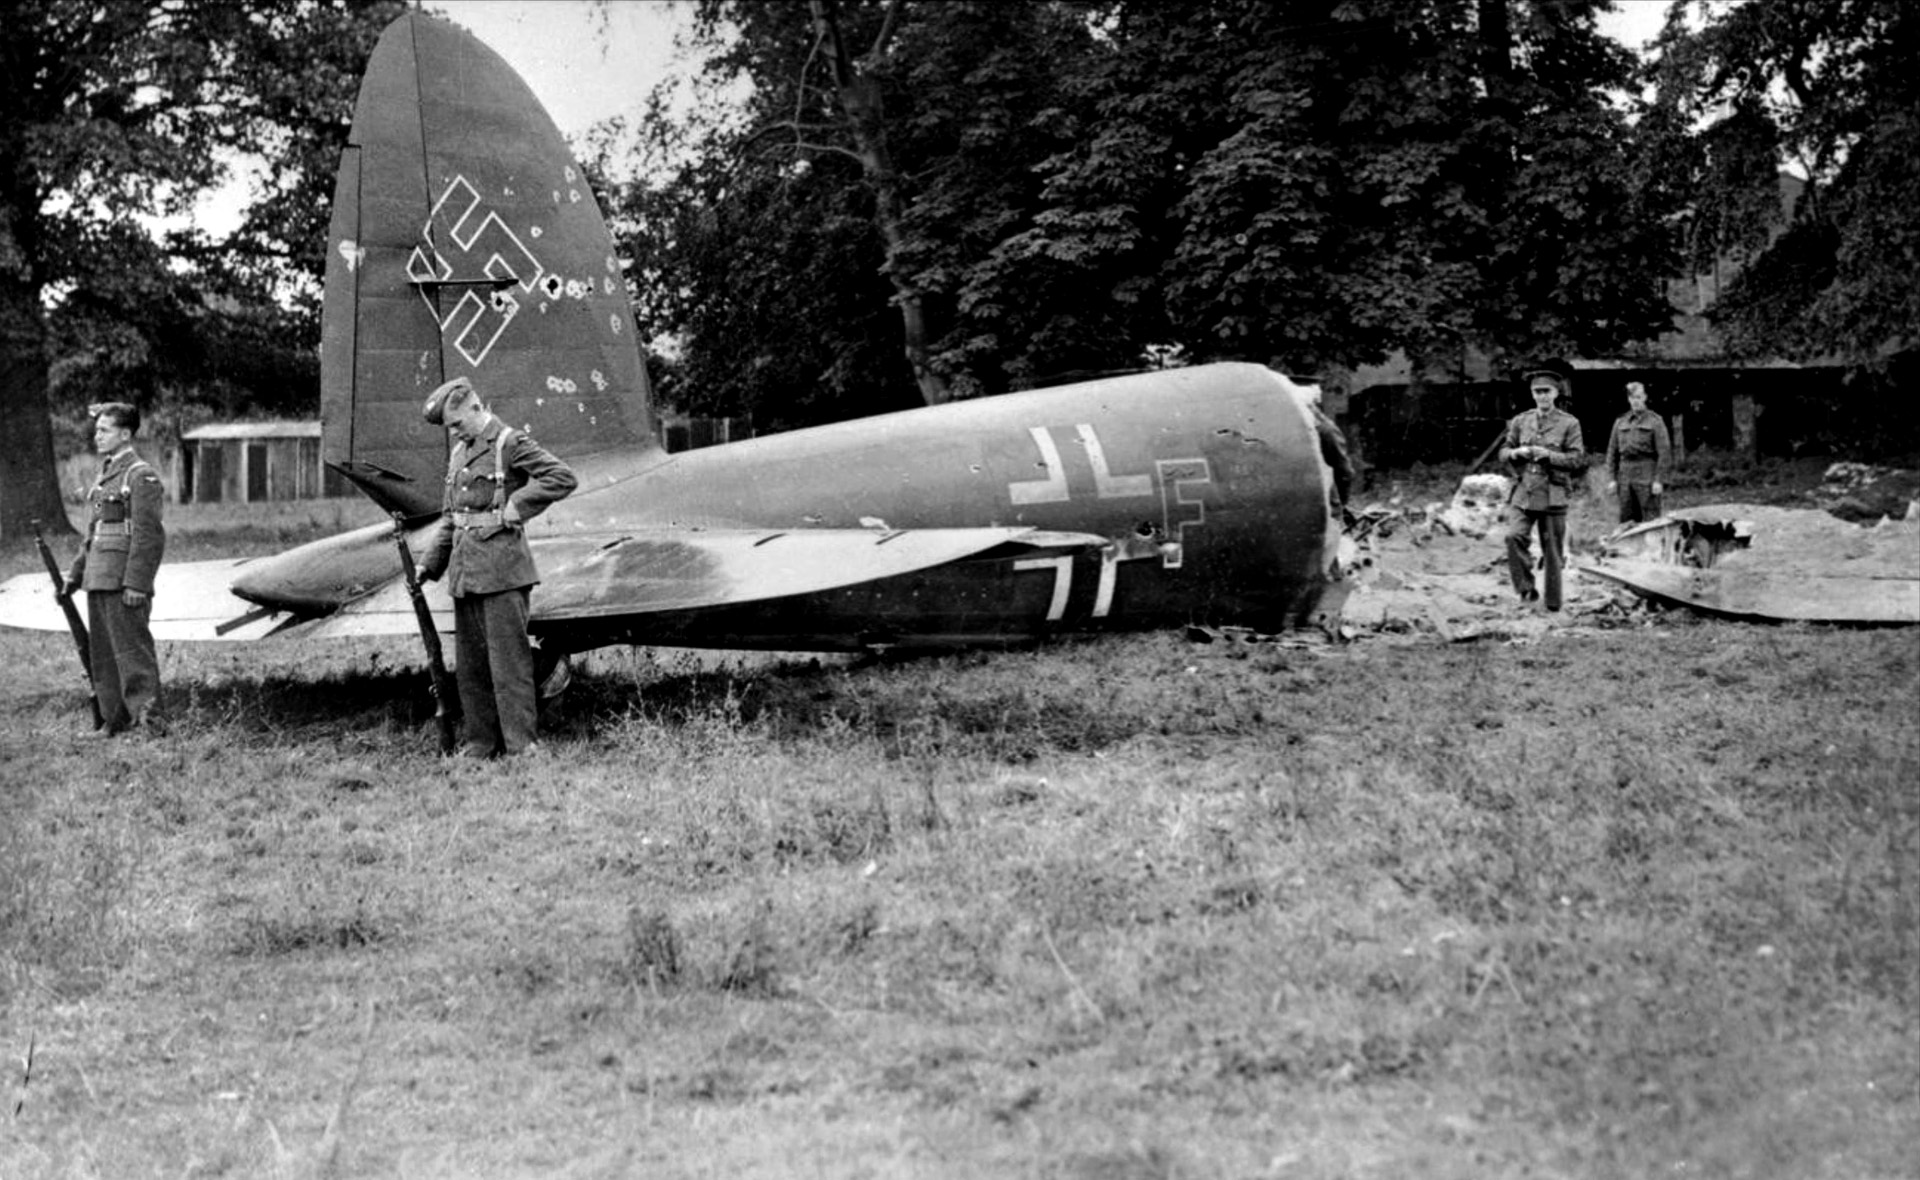 Two British soliders stand guard over a downed Heinkel He 111 bomber in August 1940. The failure of Germany’s air campaign against Britain caused Hitler to shift his focus to the East and embark on a disastrous campaign against the Soviet Union. While the RAF suffered heavy losses, the Luftwaffe suffered even more. 